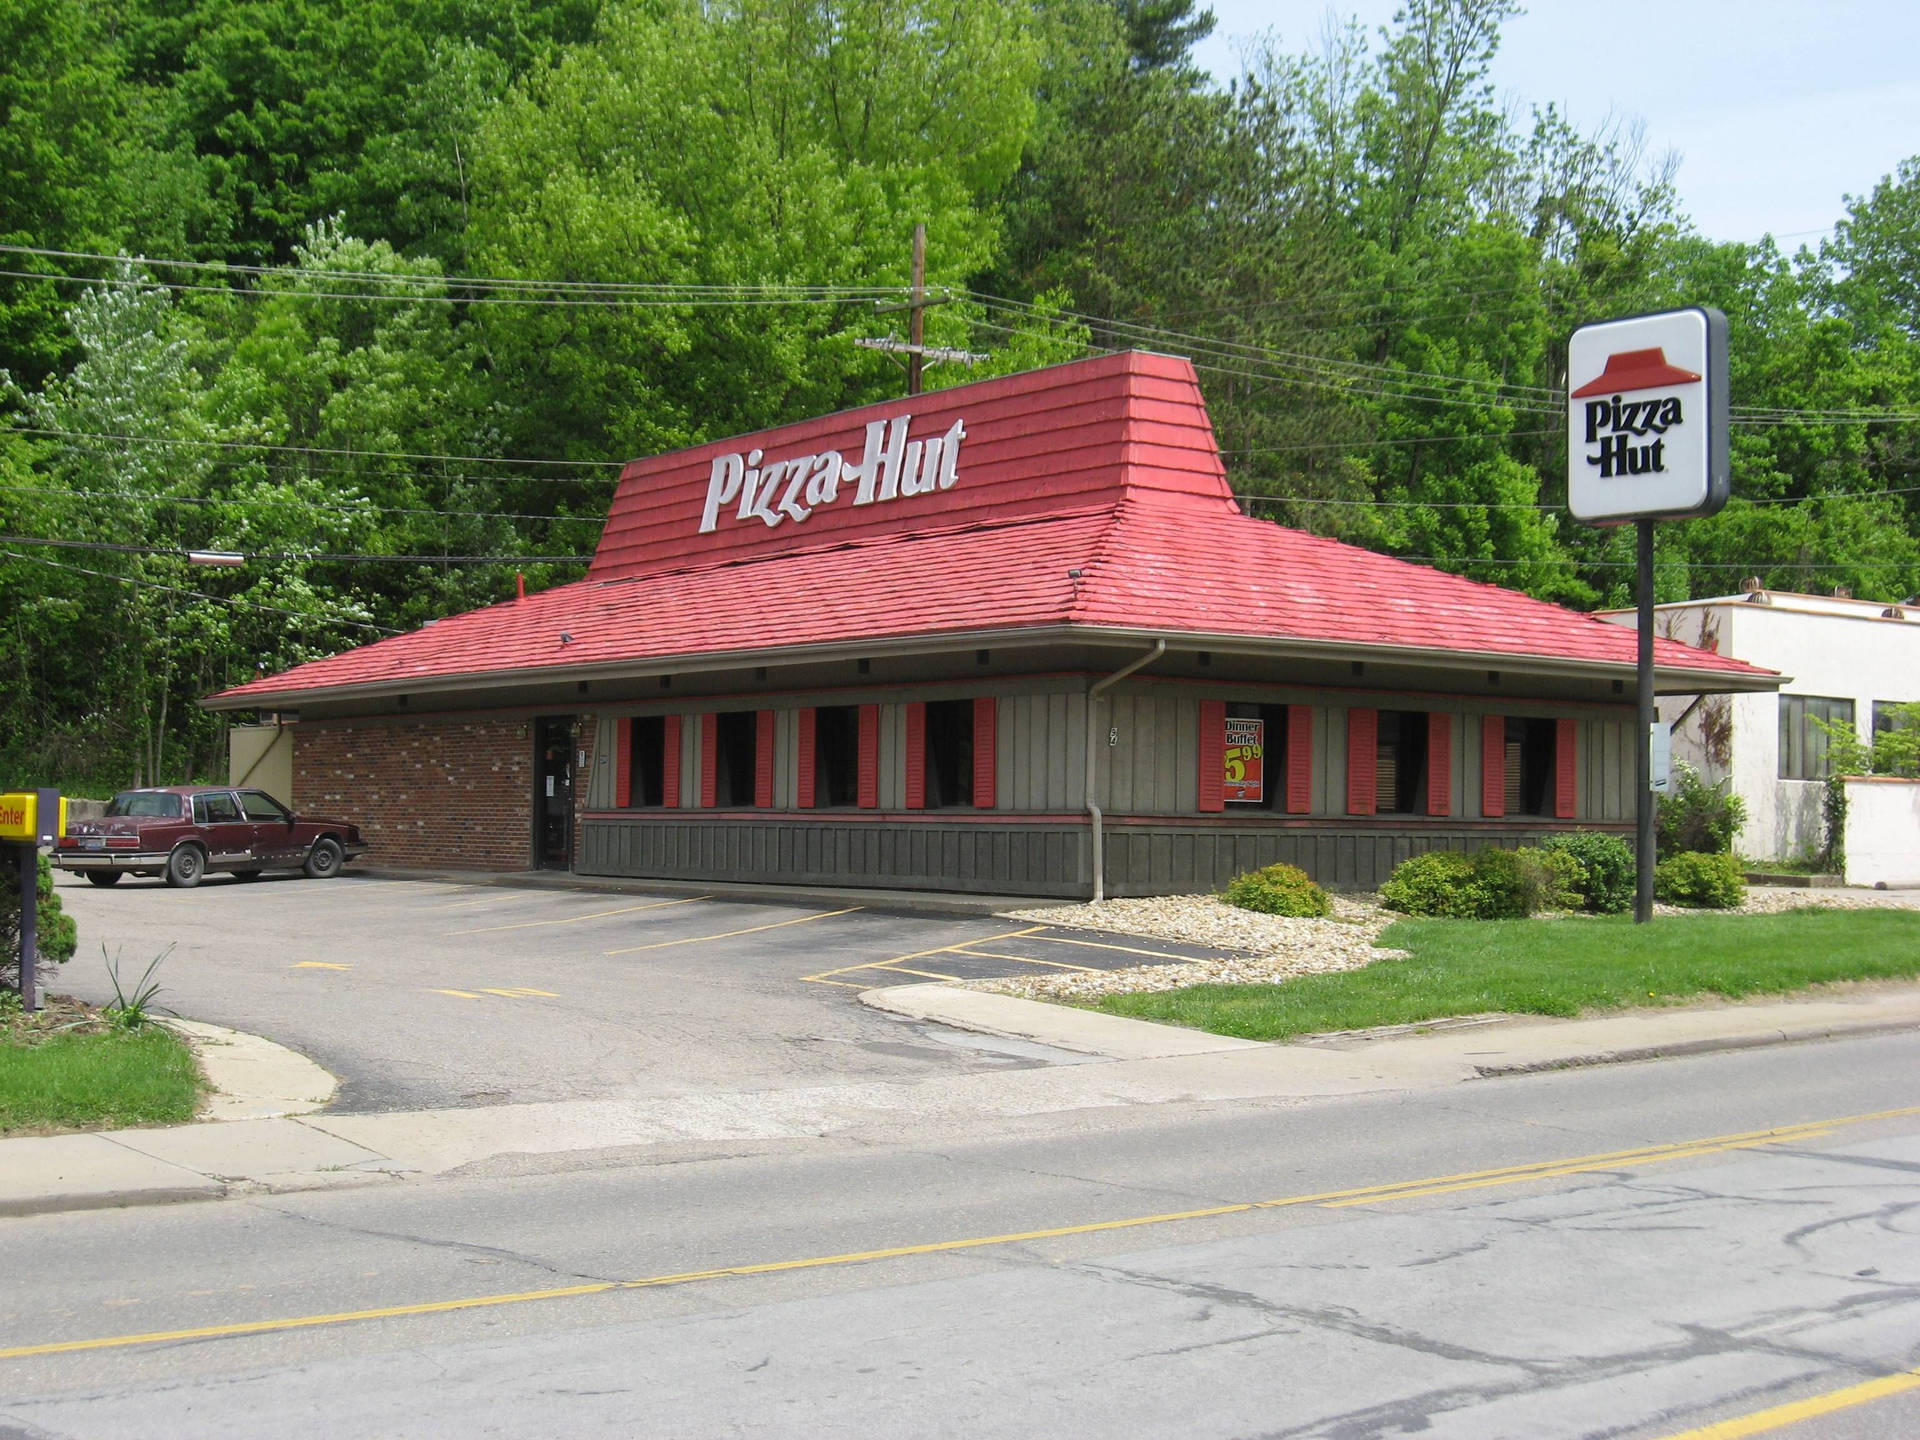 Pizza Hut Red Lid Roof